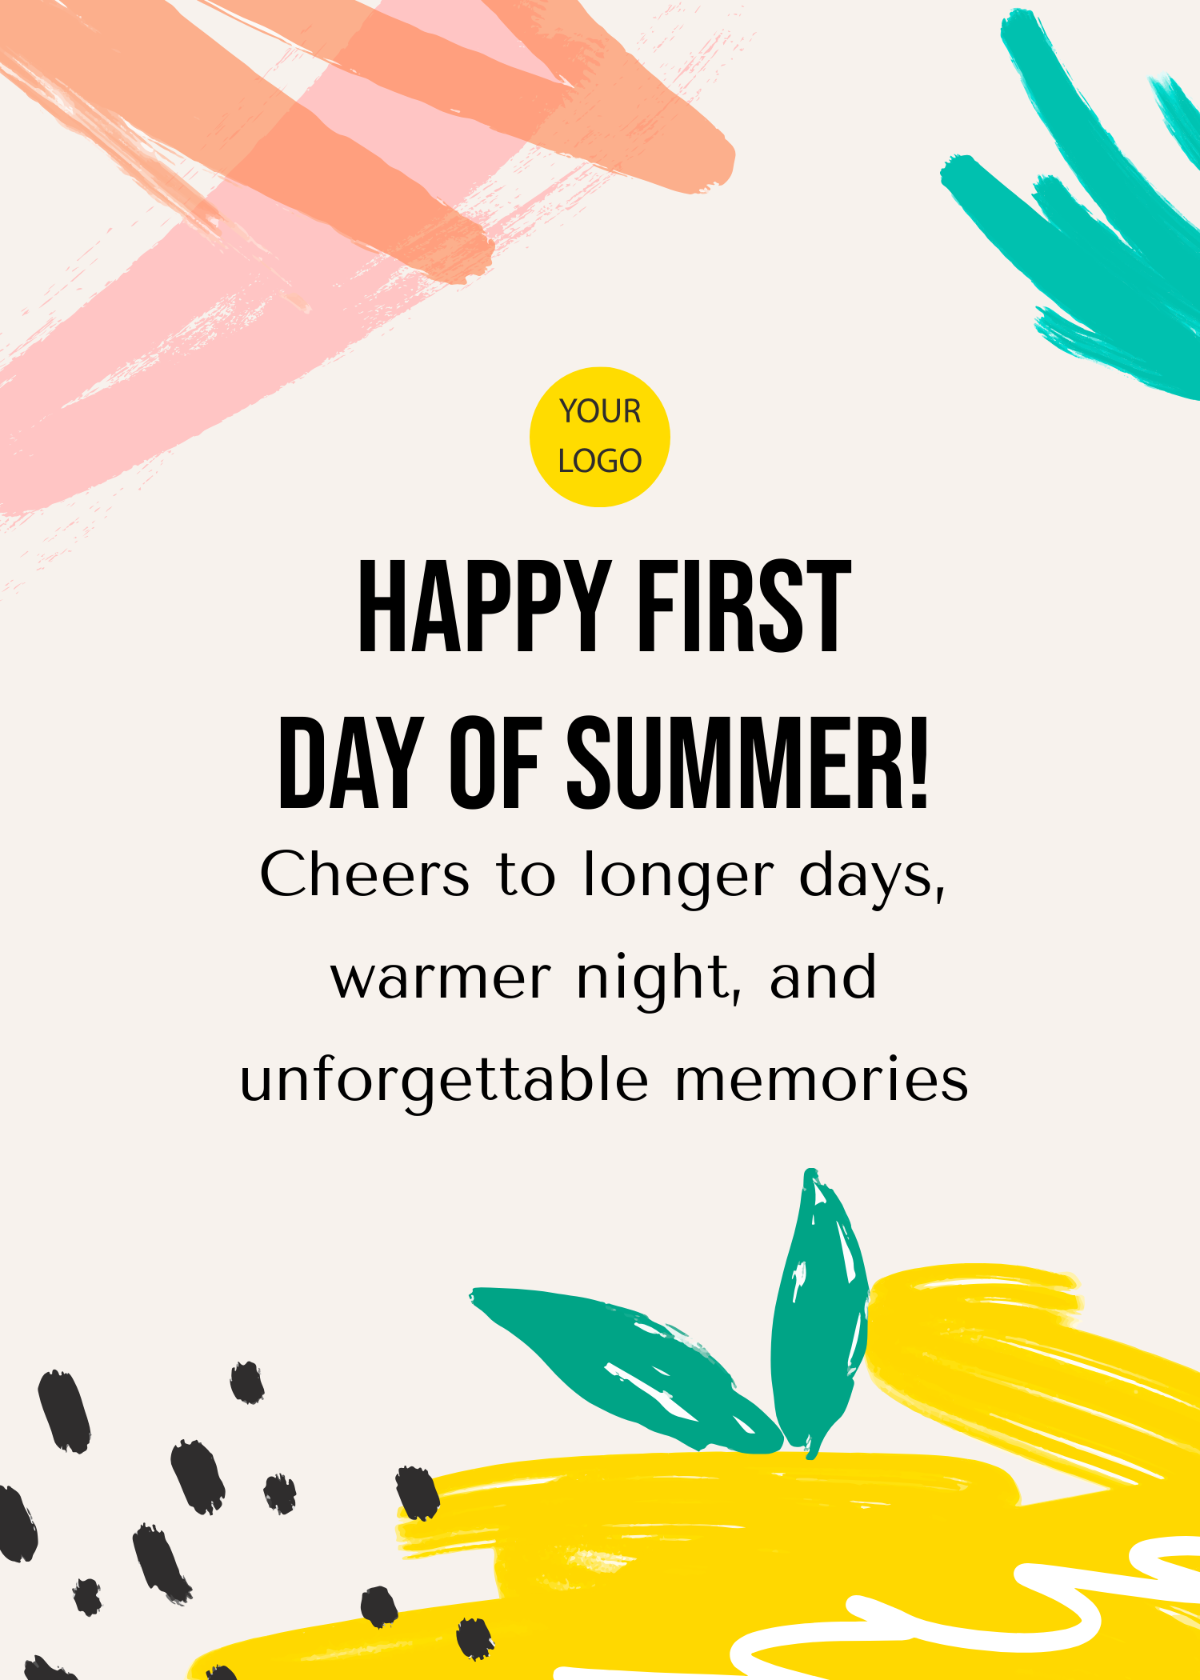 First Day of Summer Message